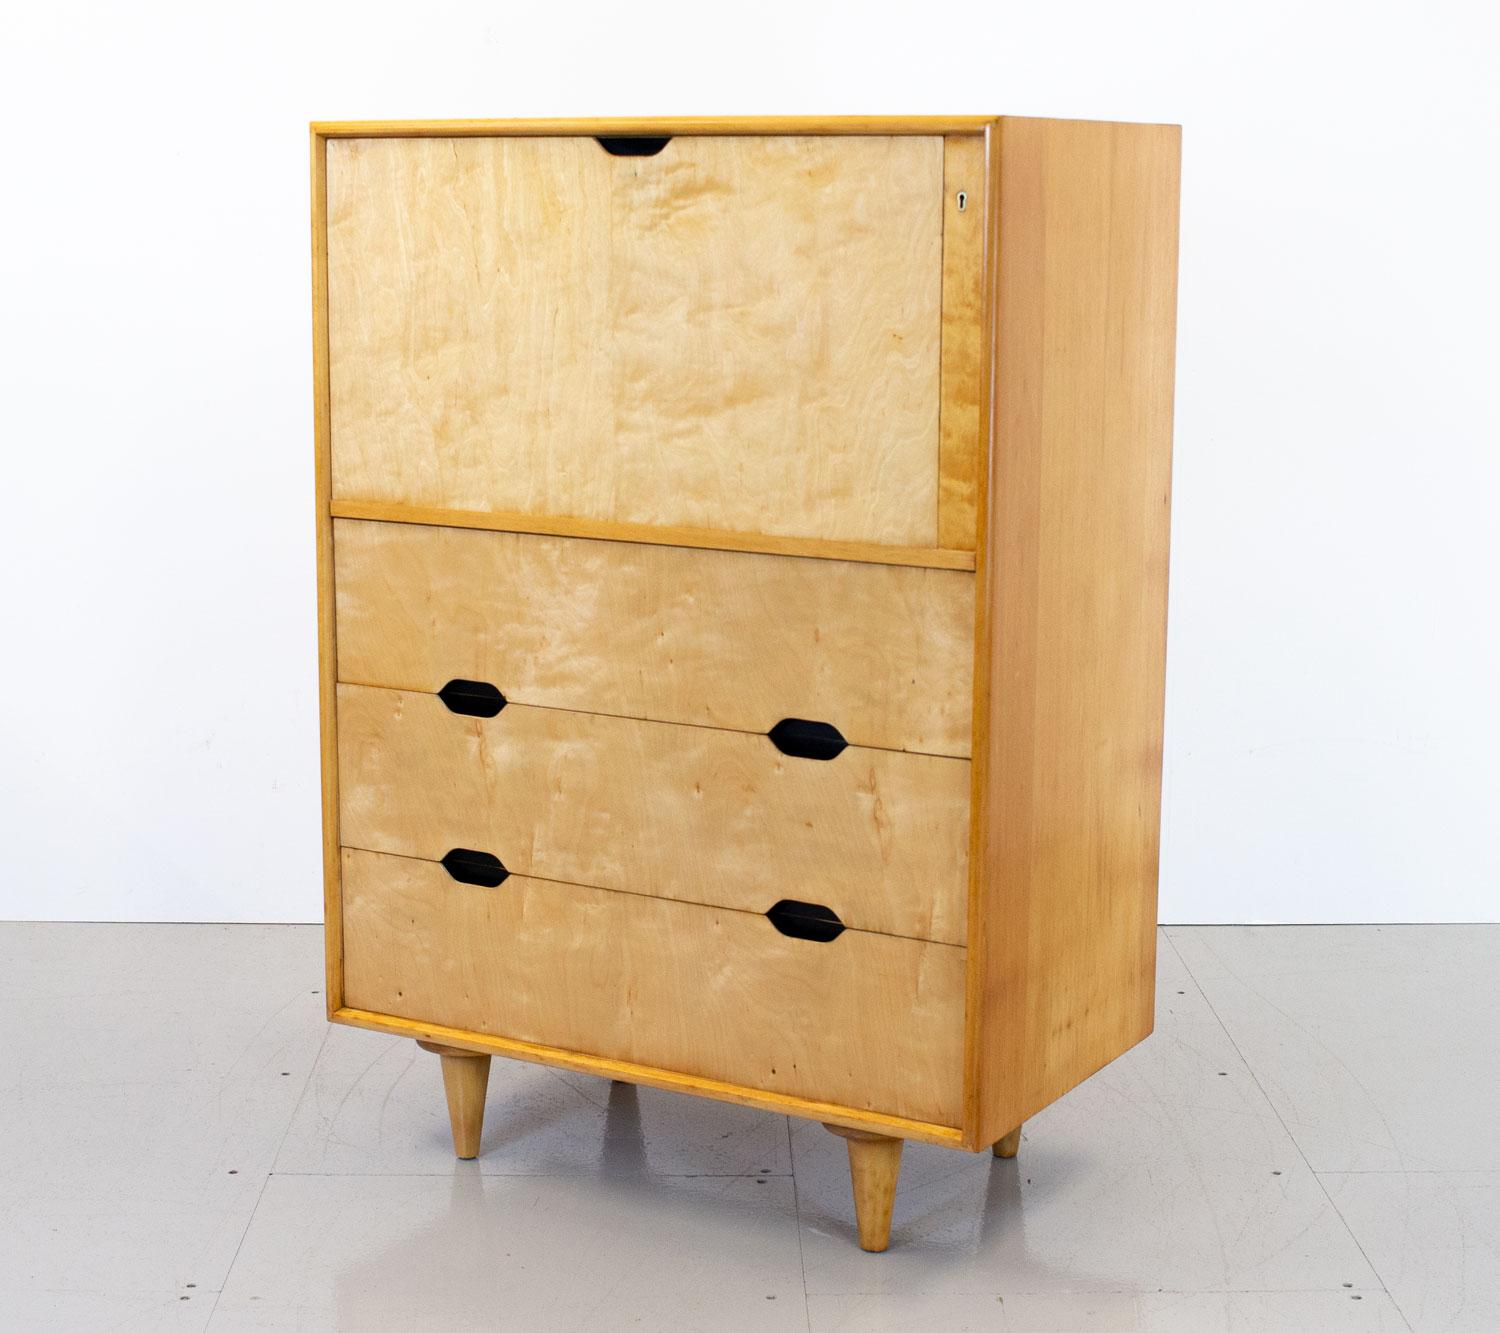 1950s bureau designed and made by Vesper for Heal’s of London. Pieces from this range are rare to see. It has a solid beech carcass and maple veneered drawer and door fronts with recessed handles and tapered legs. There are 3 good sized drawers made